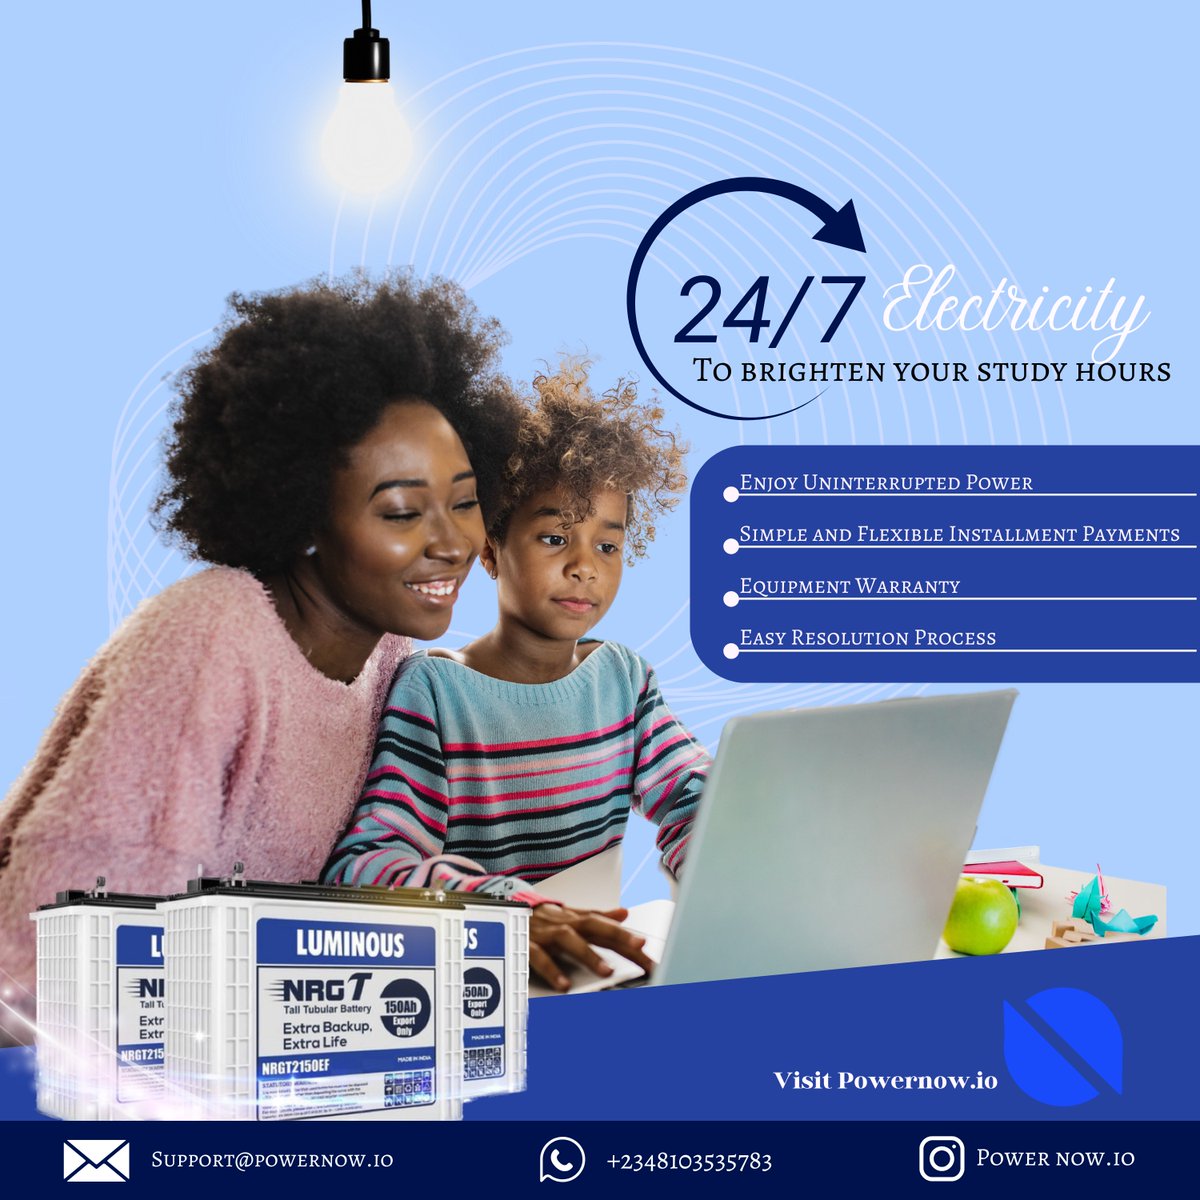 Secure a brighter future for your kids with uninterrupted electricity.

Visit powernow.io and select an inverter  installment plan that matches your budget. 

#poweringlagos #EmpoweringFuture